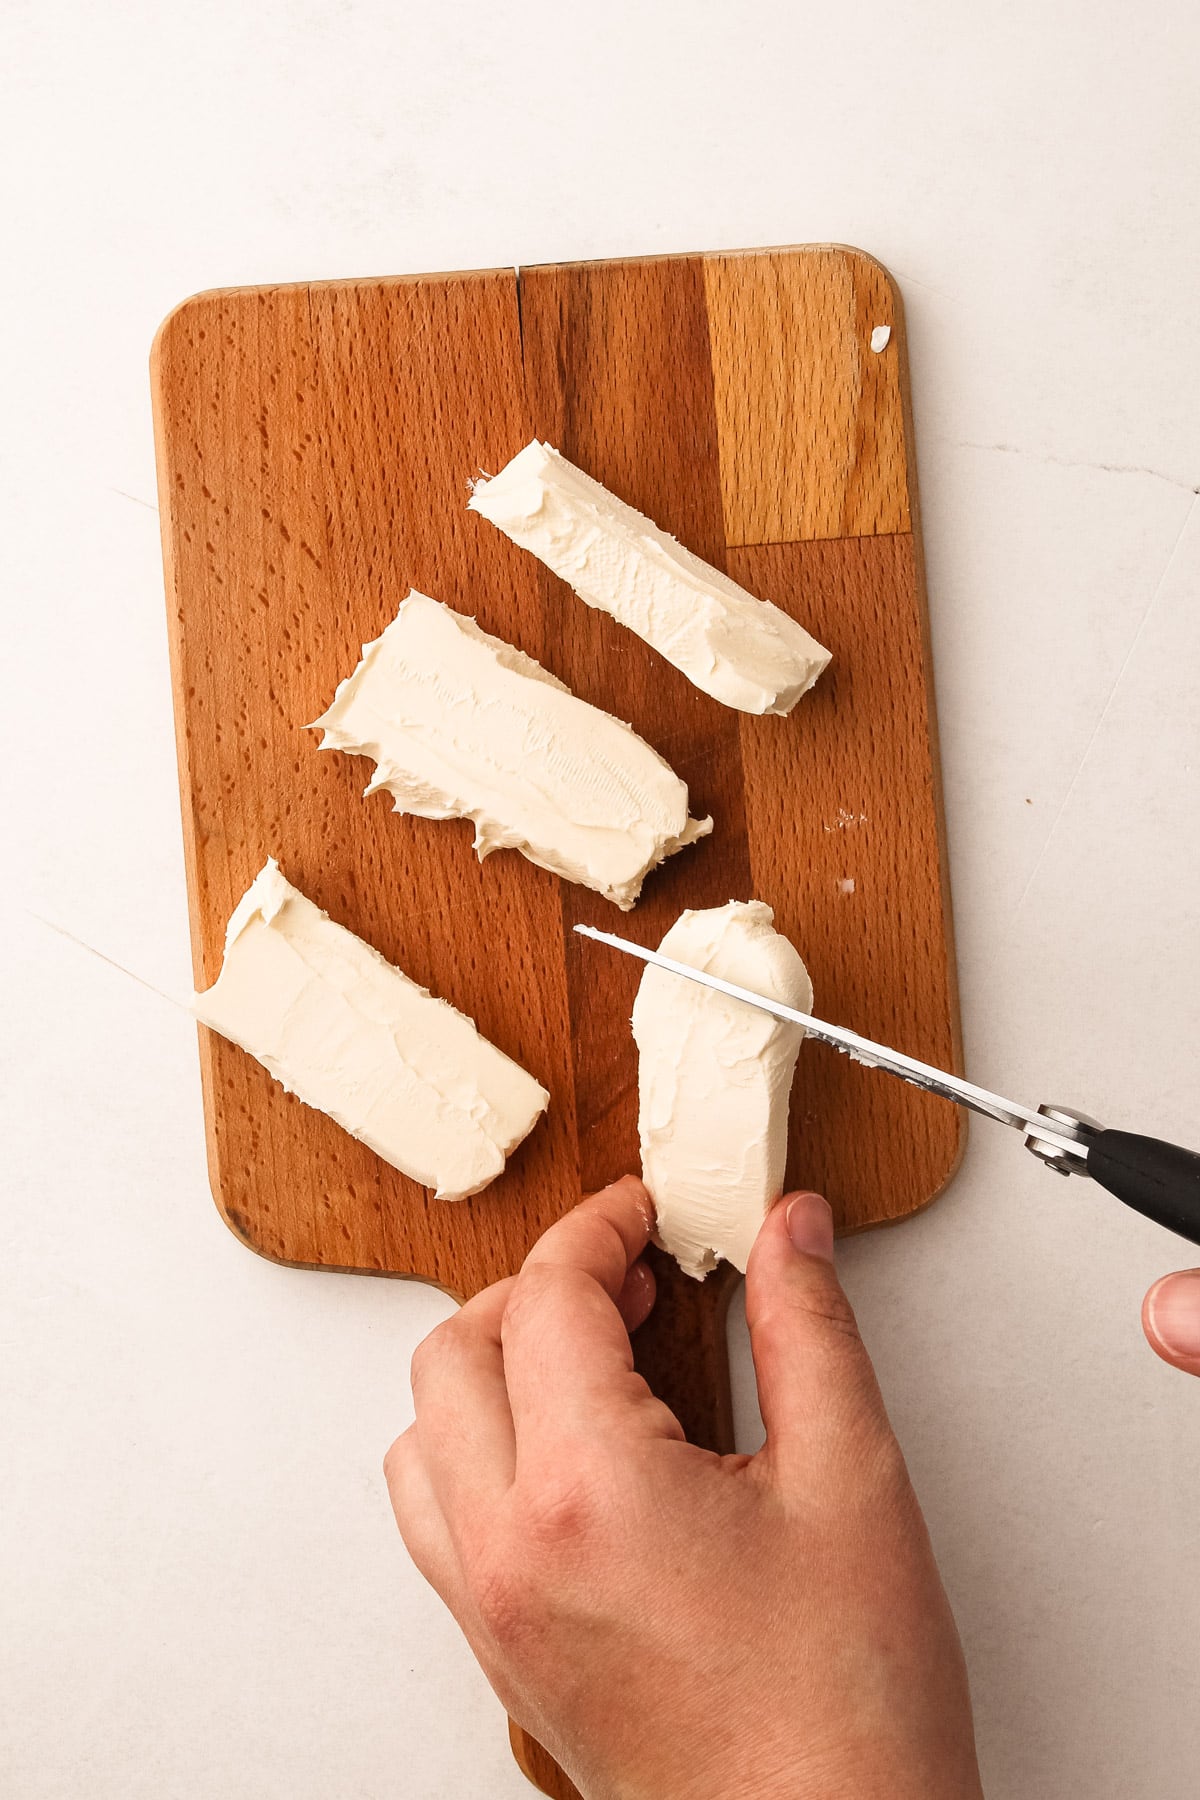 A hand using kitchen shears to cut cream cheese into pieces for puff pastry pepper jelly bites.